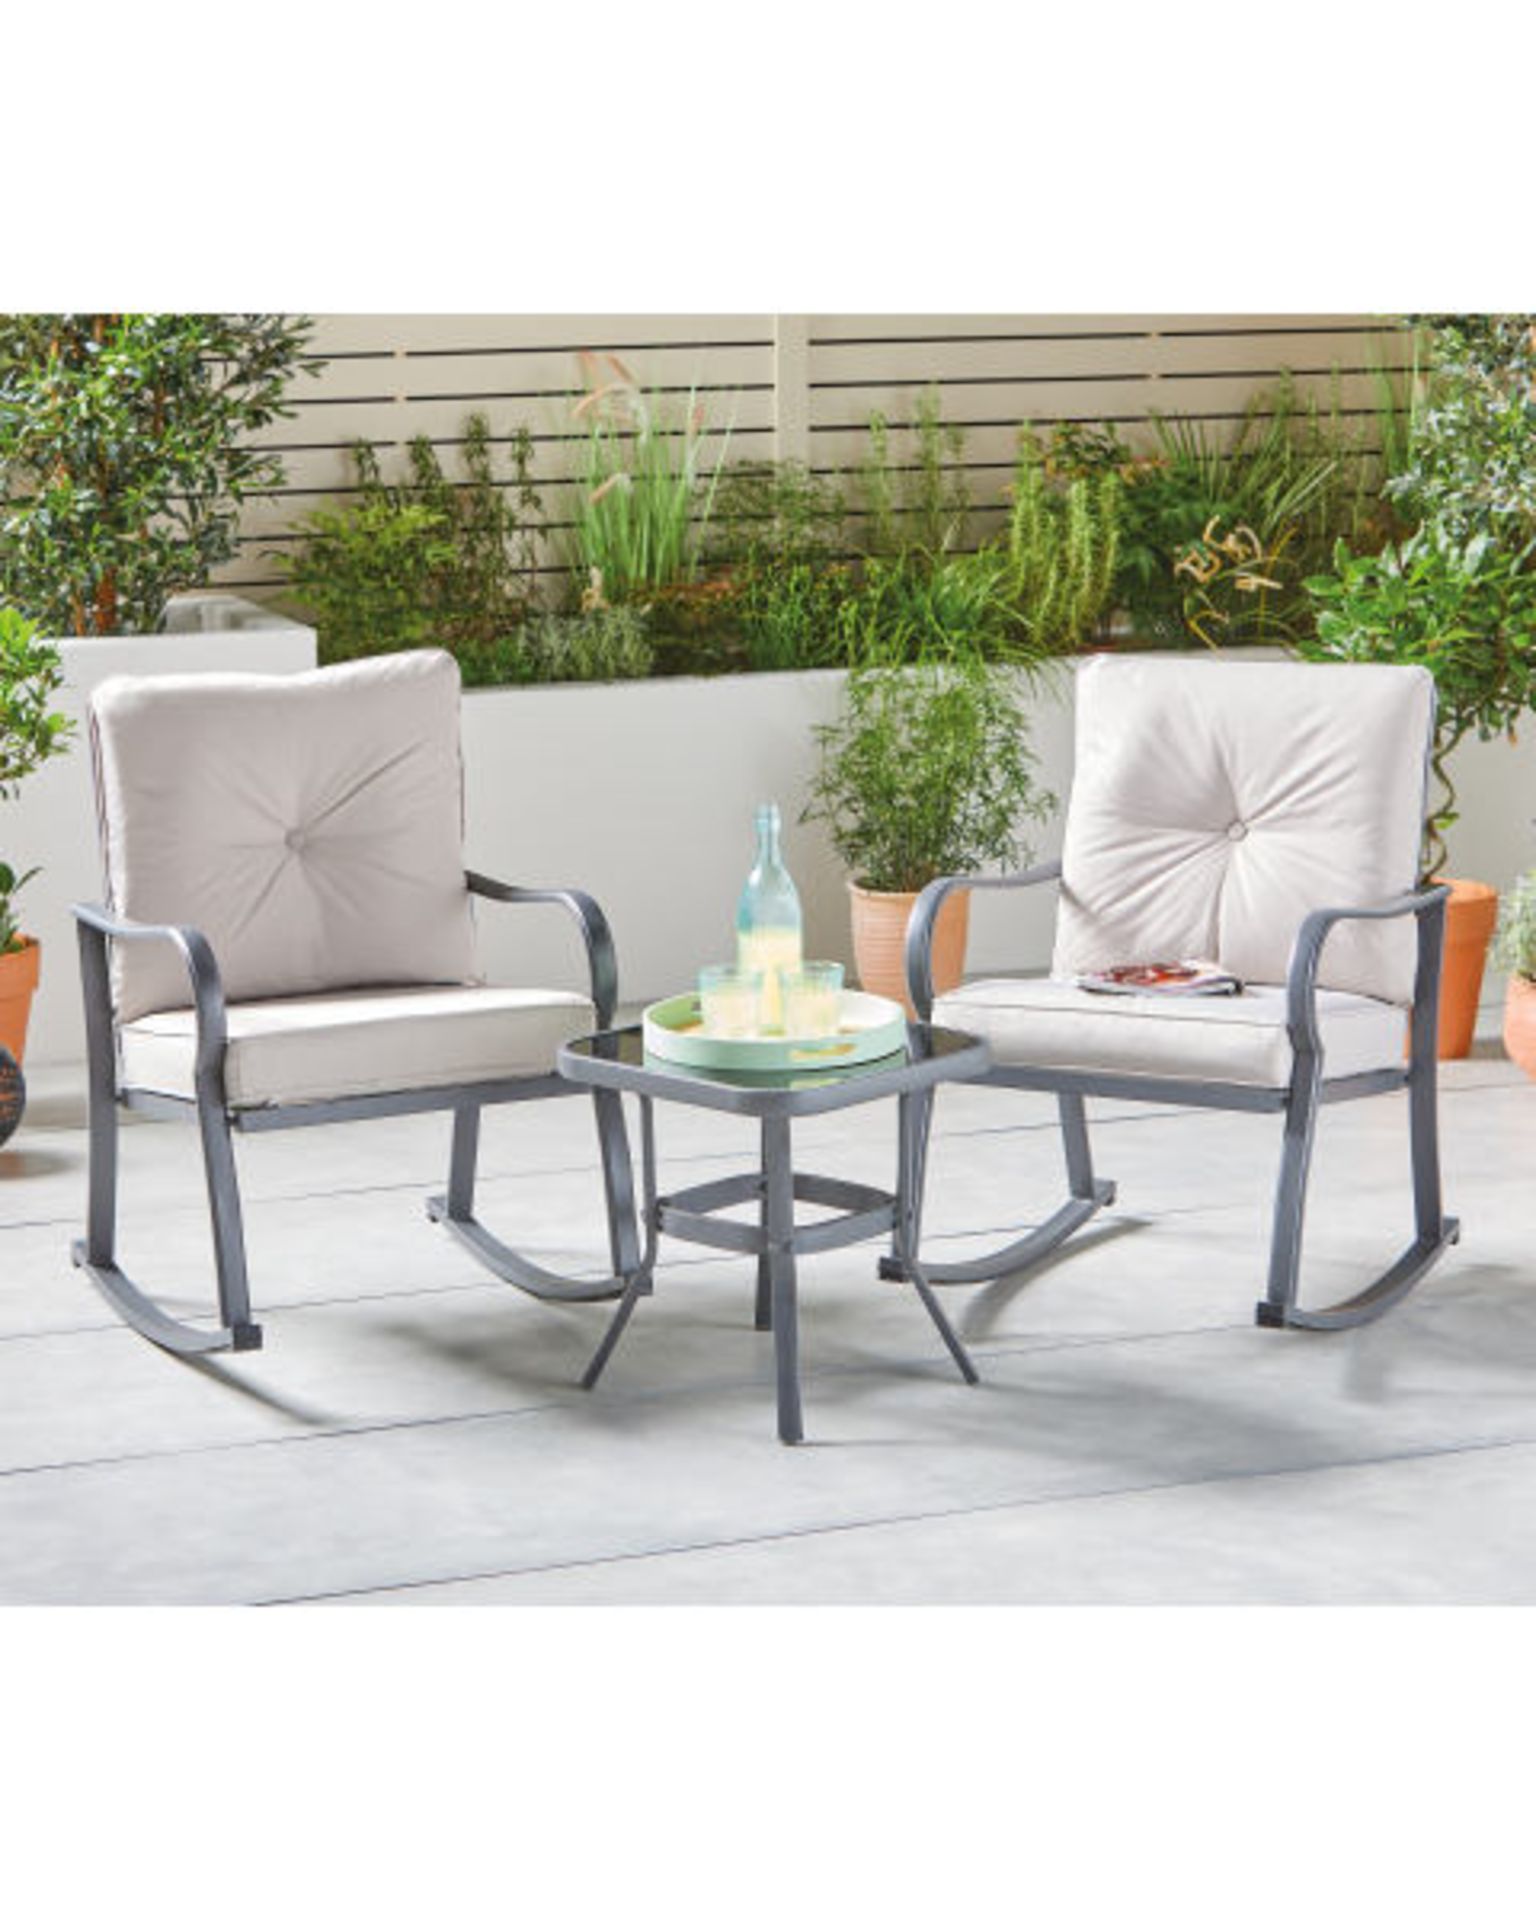 Luxury Rocking Bistro Set. Sit back and rock away in style with this stunning Luxury Rocking - Image 2 of 6